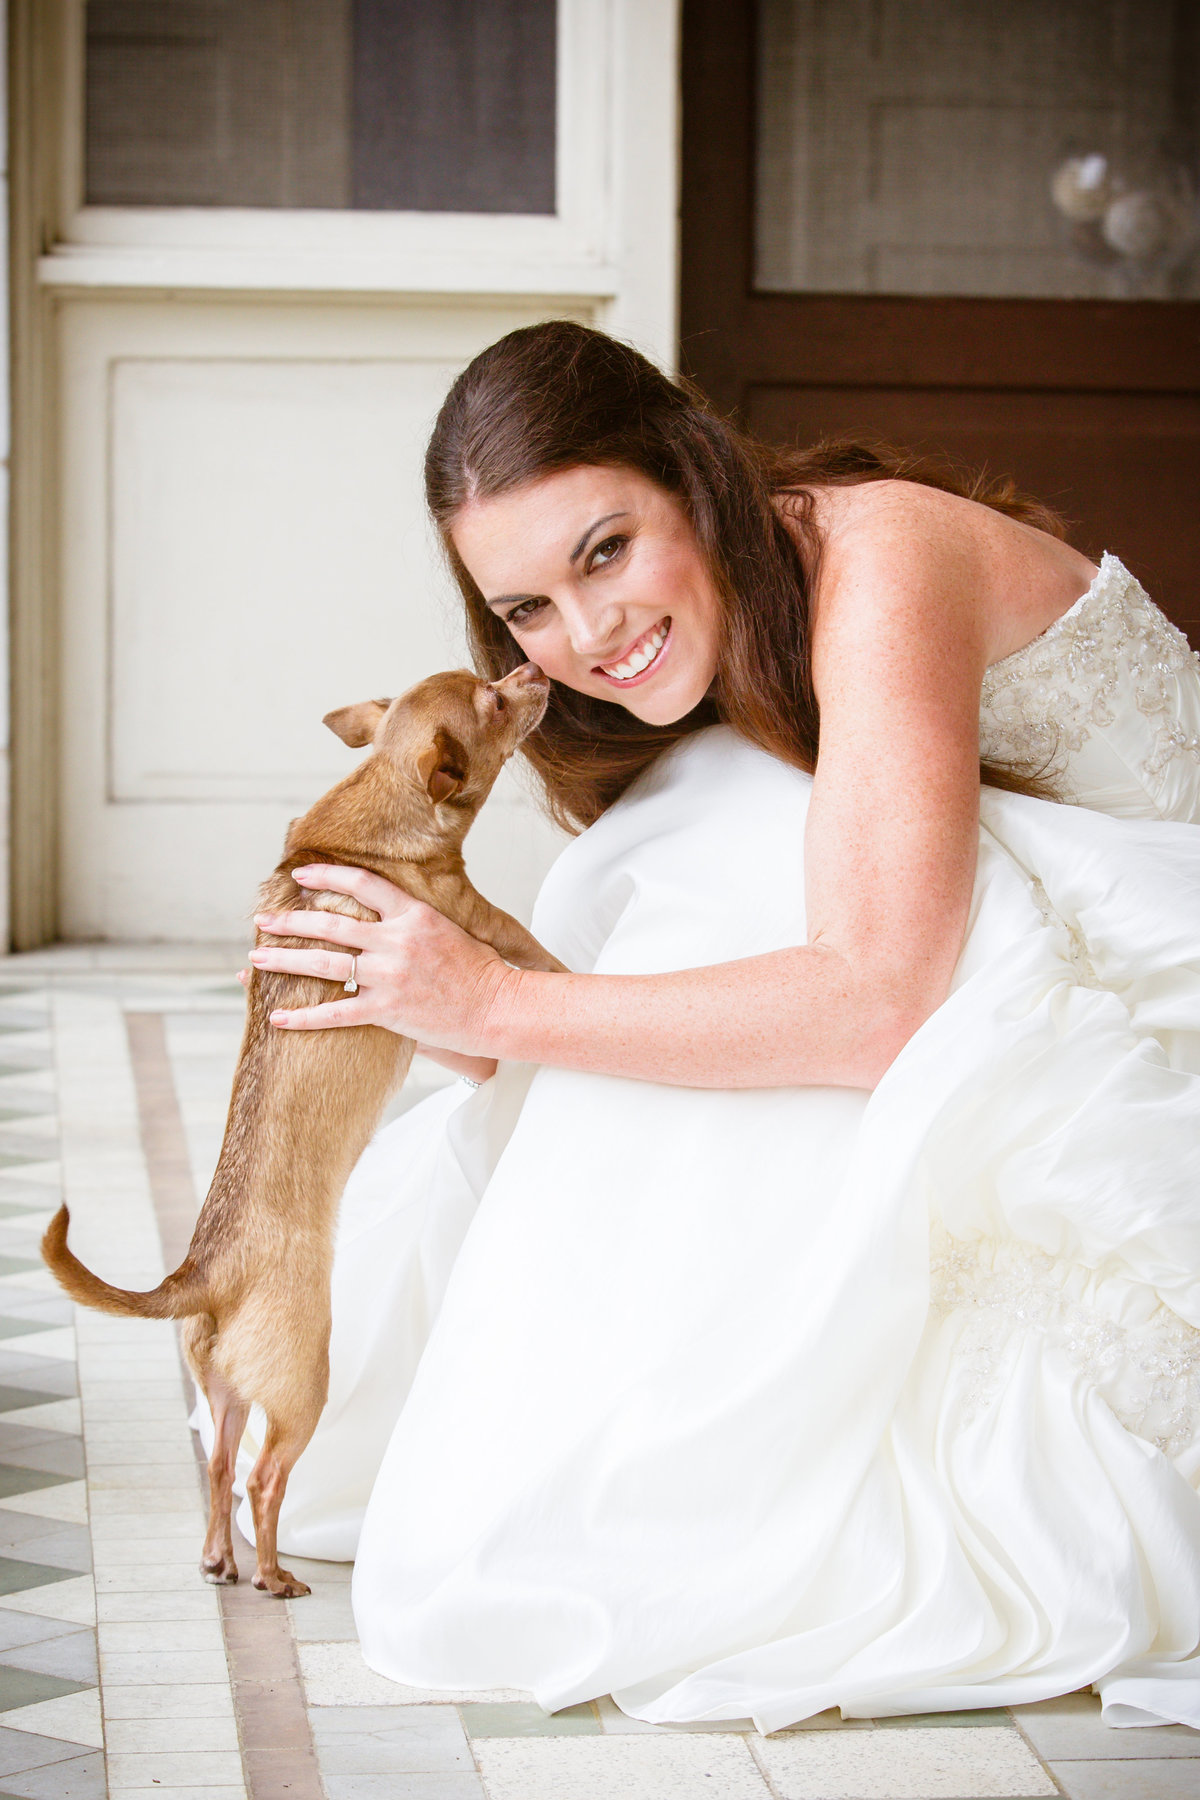 Lindsay Coulter's bridal photo with her dog Lucy before her wedding to George Zoghby in Mobile, Alabama.